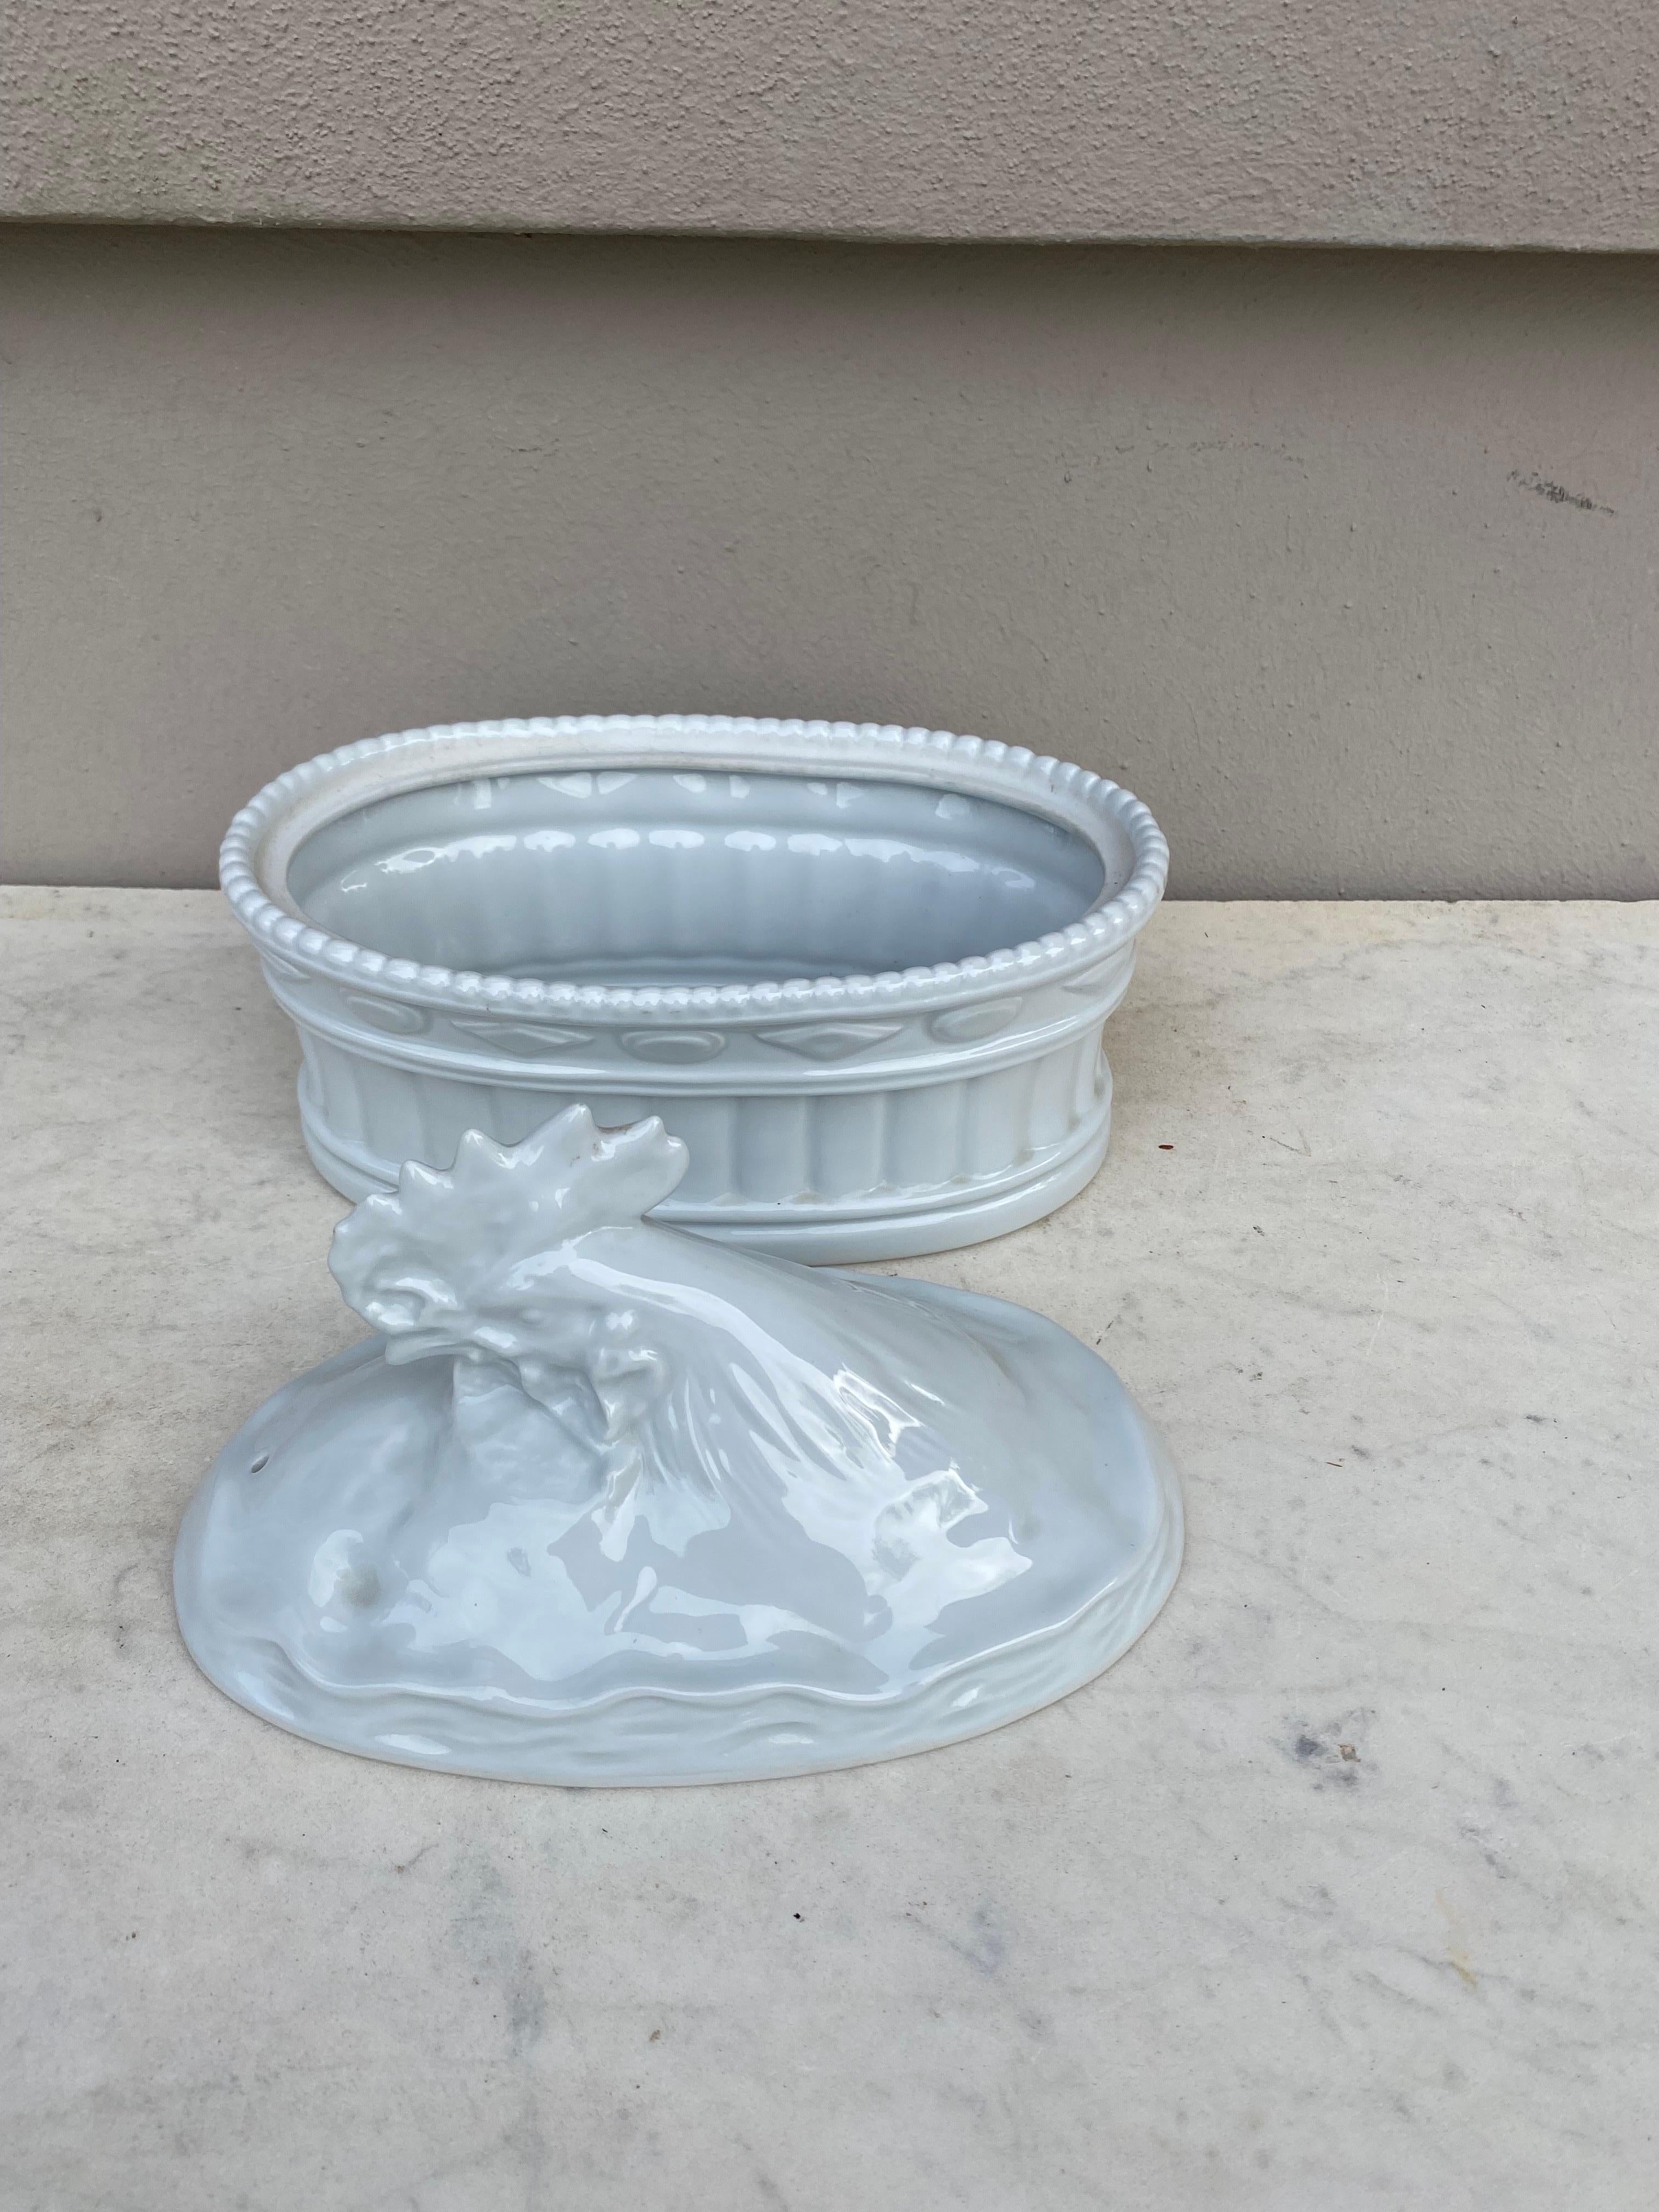 French Trompe L'oeil White Porcelain Rooster Pâté Tureen In Good Condition For Sale In Austin, TX